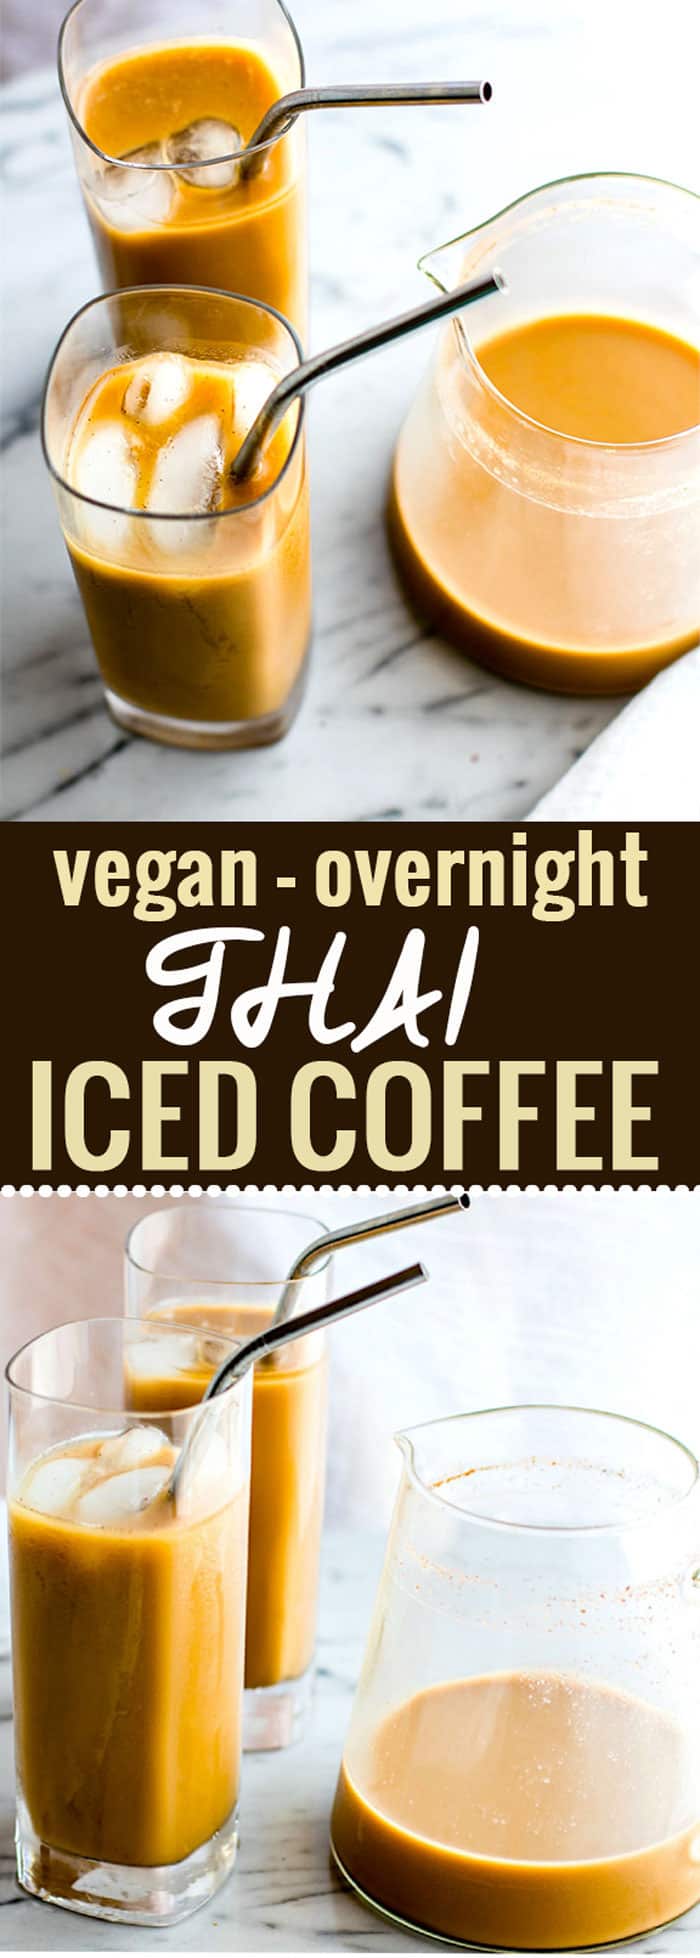 Vegan Overnight Thai Iced Coffee. A super simple THAI iced coffee that's healthy and packed with flavor! This vegan iced coffee version is perfect to make ahead and enjoy the next morning. @lovemysilk #nutchello